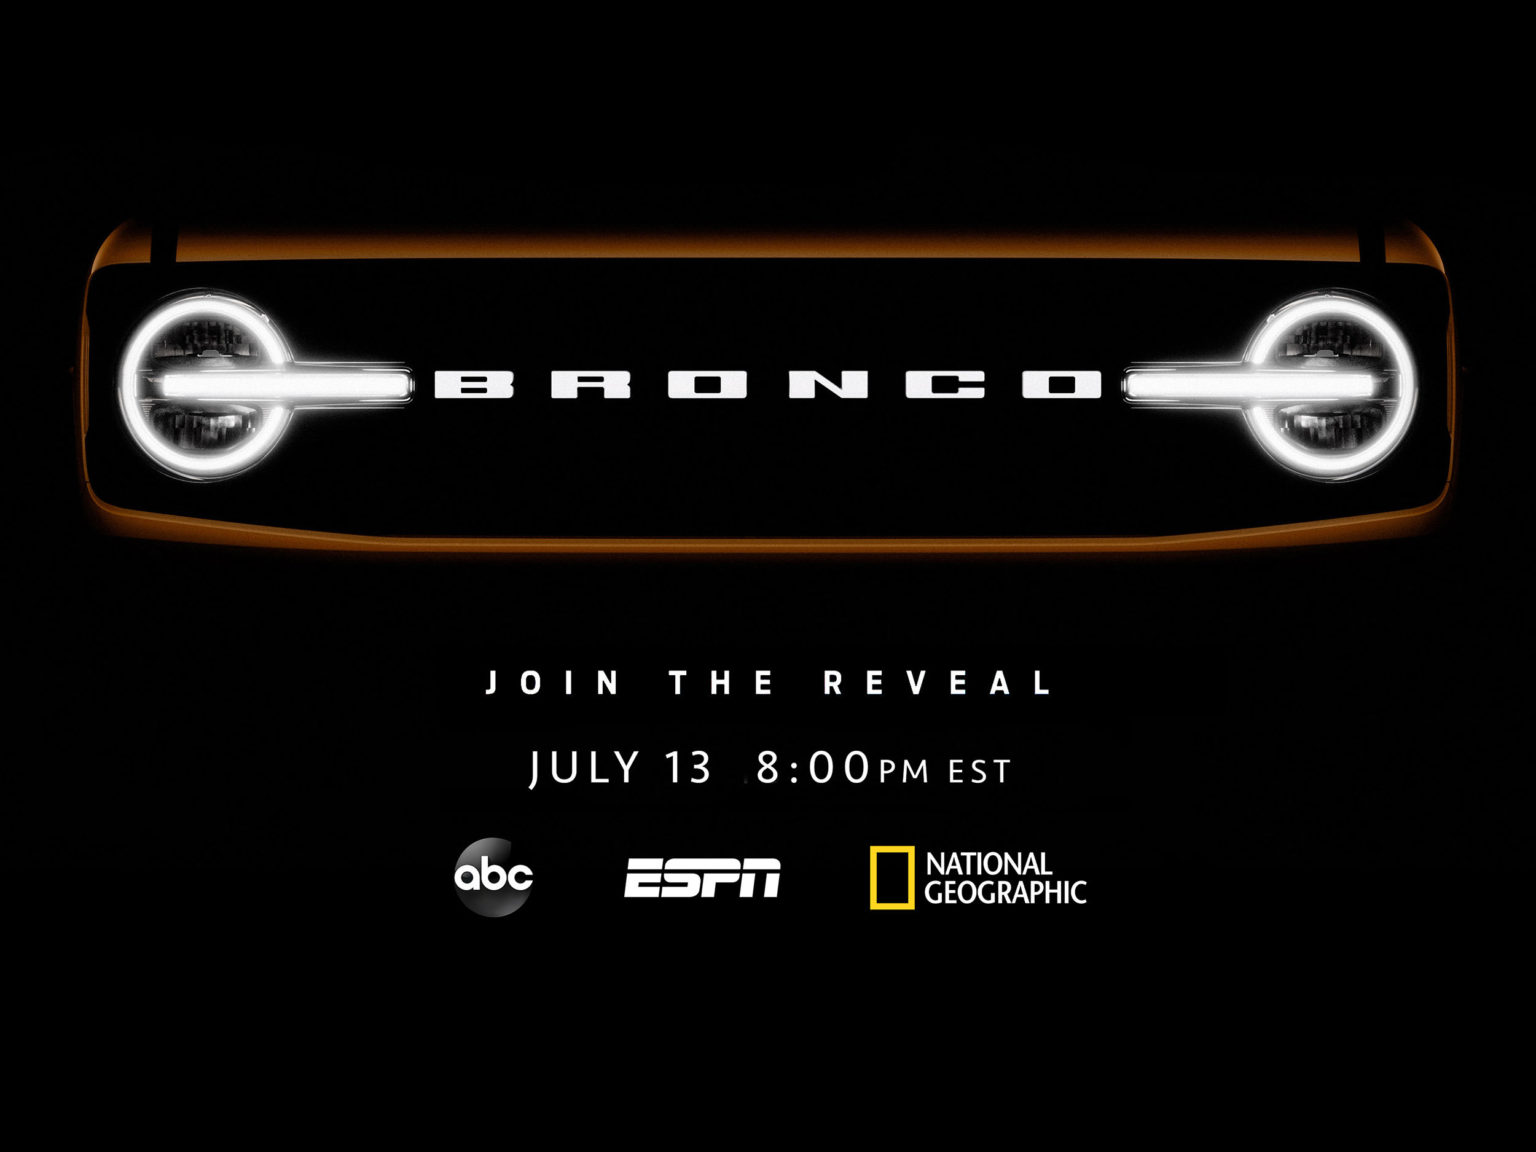 Disney's family of channels will feature the Bronco and Bronco Sport as part of a large debut announcement.